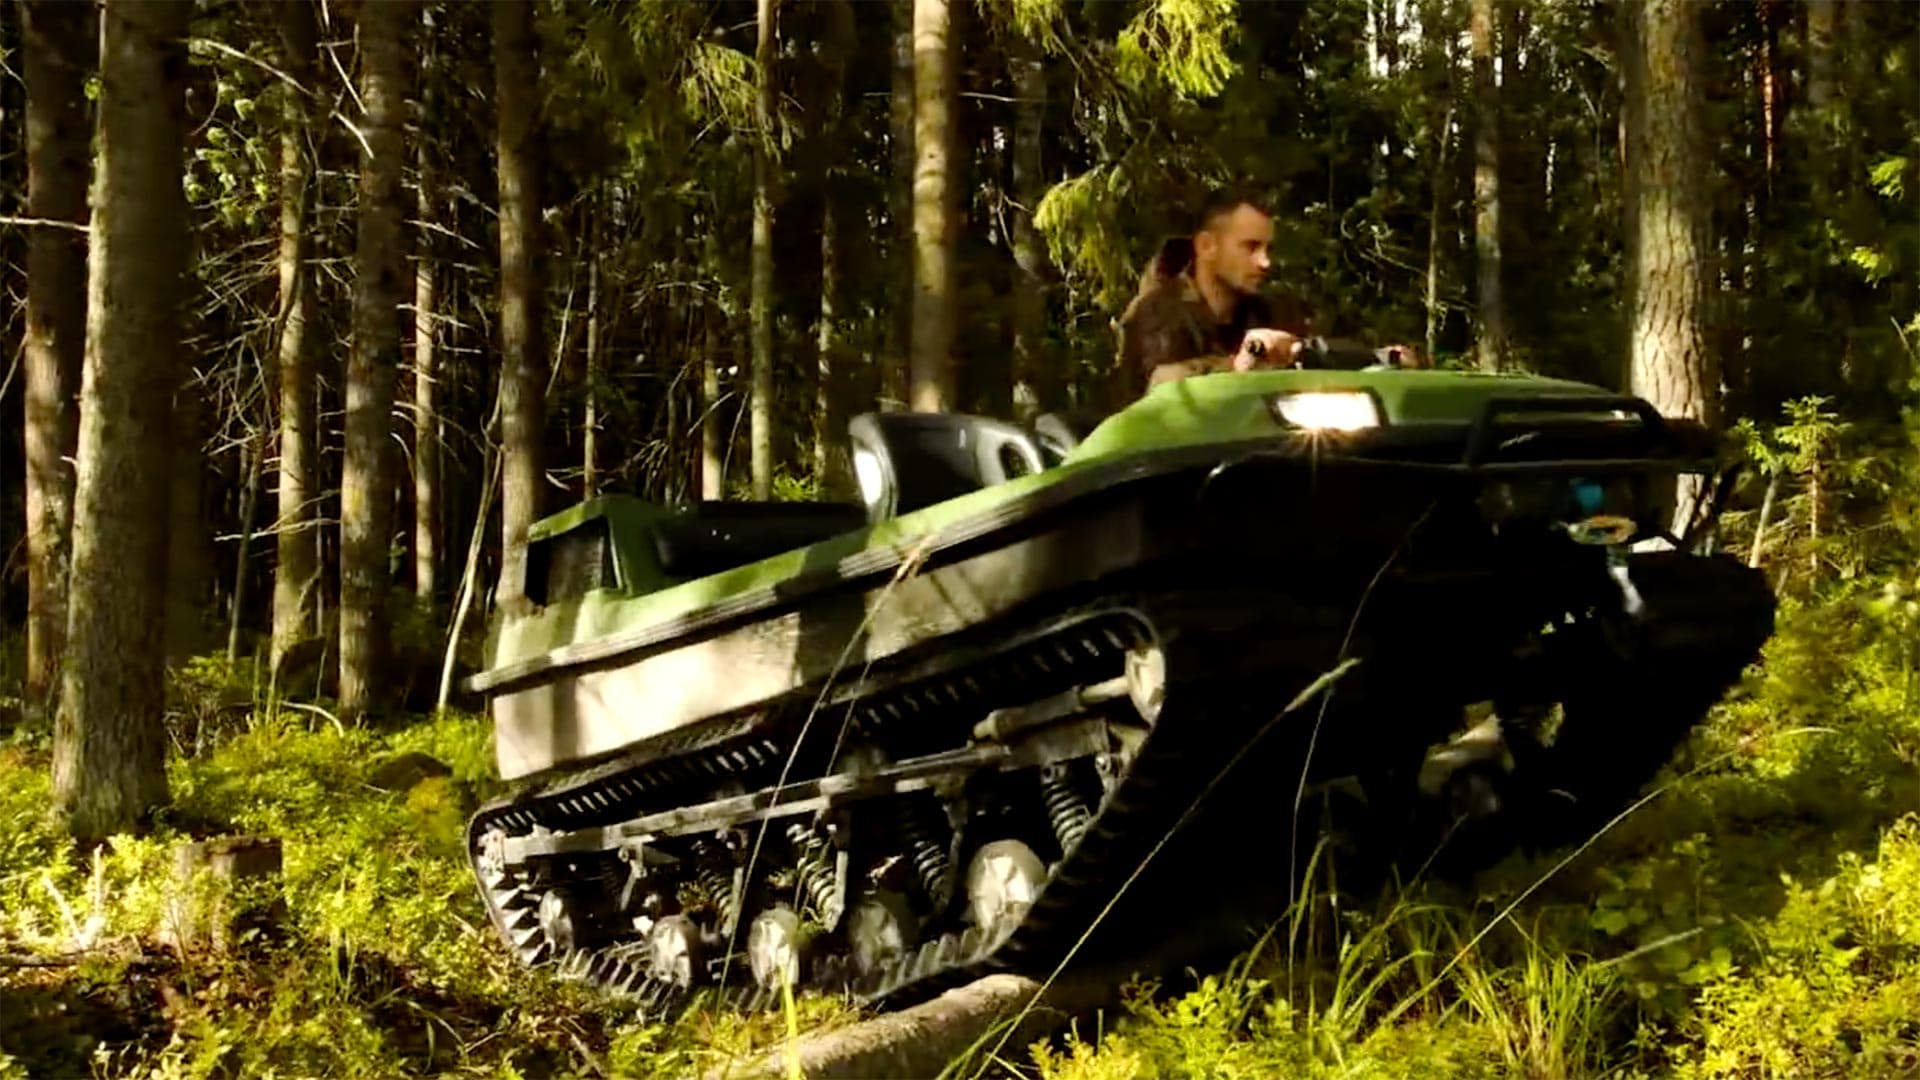 Get a Load of the Unstoppable Tinger Track S500 Amphibious Vehicle